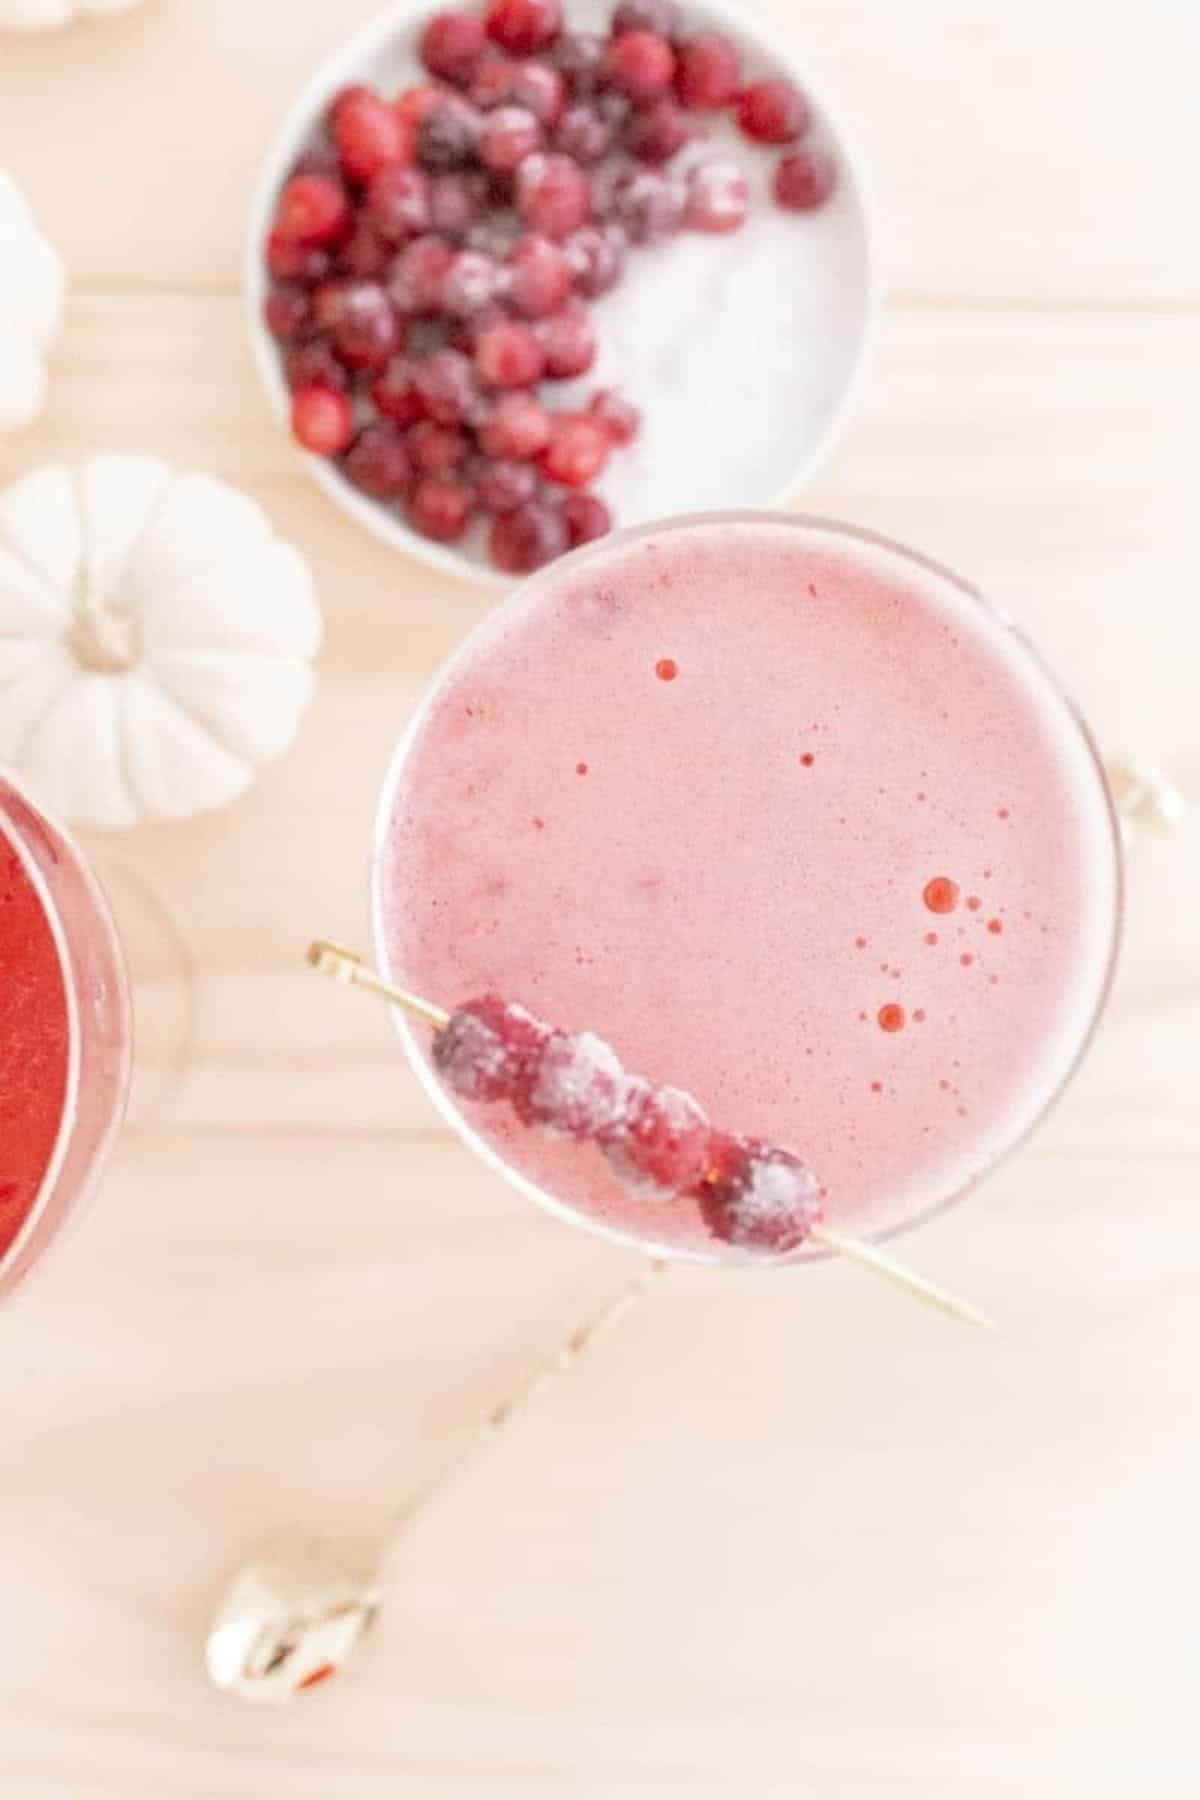 Cranberry-Herb Cocktail with frozen cranberries